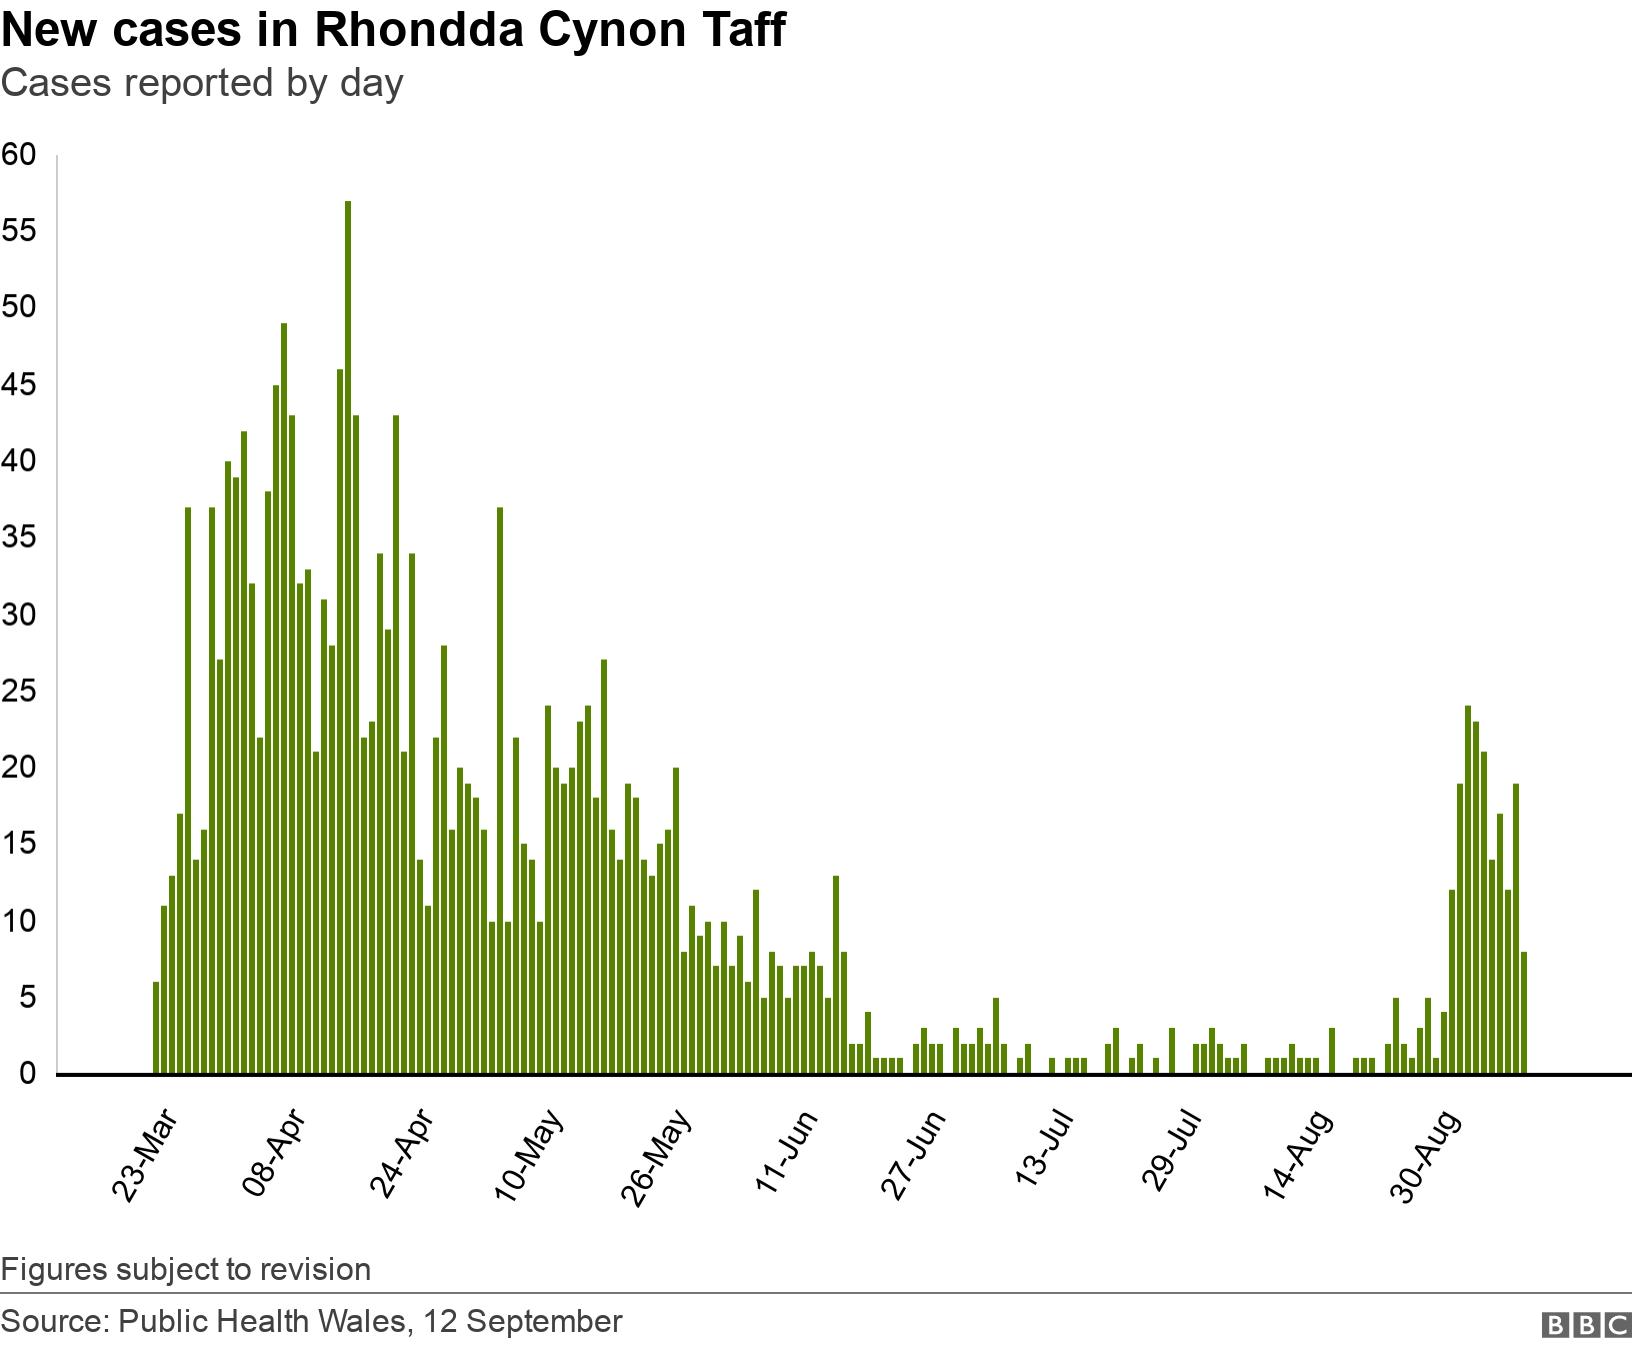 New cases in Rhondda Cynon Taff. Cases reported by day. Figures subject to revision.